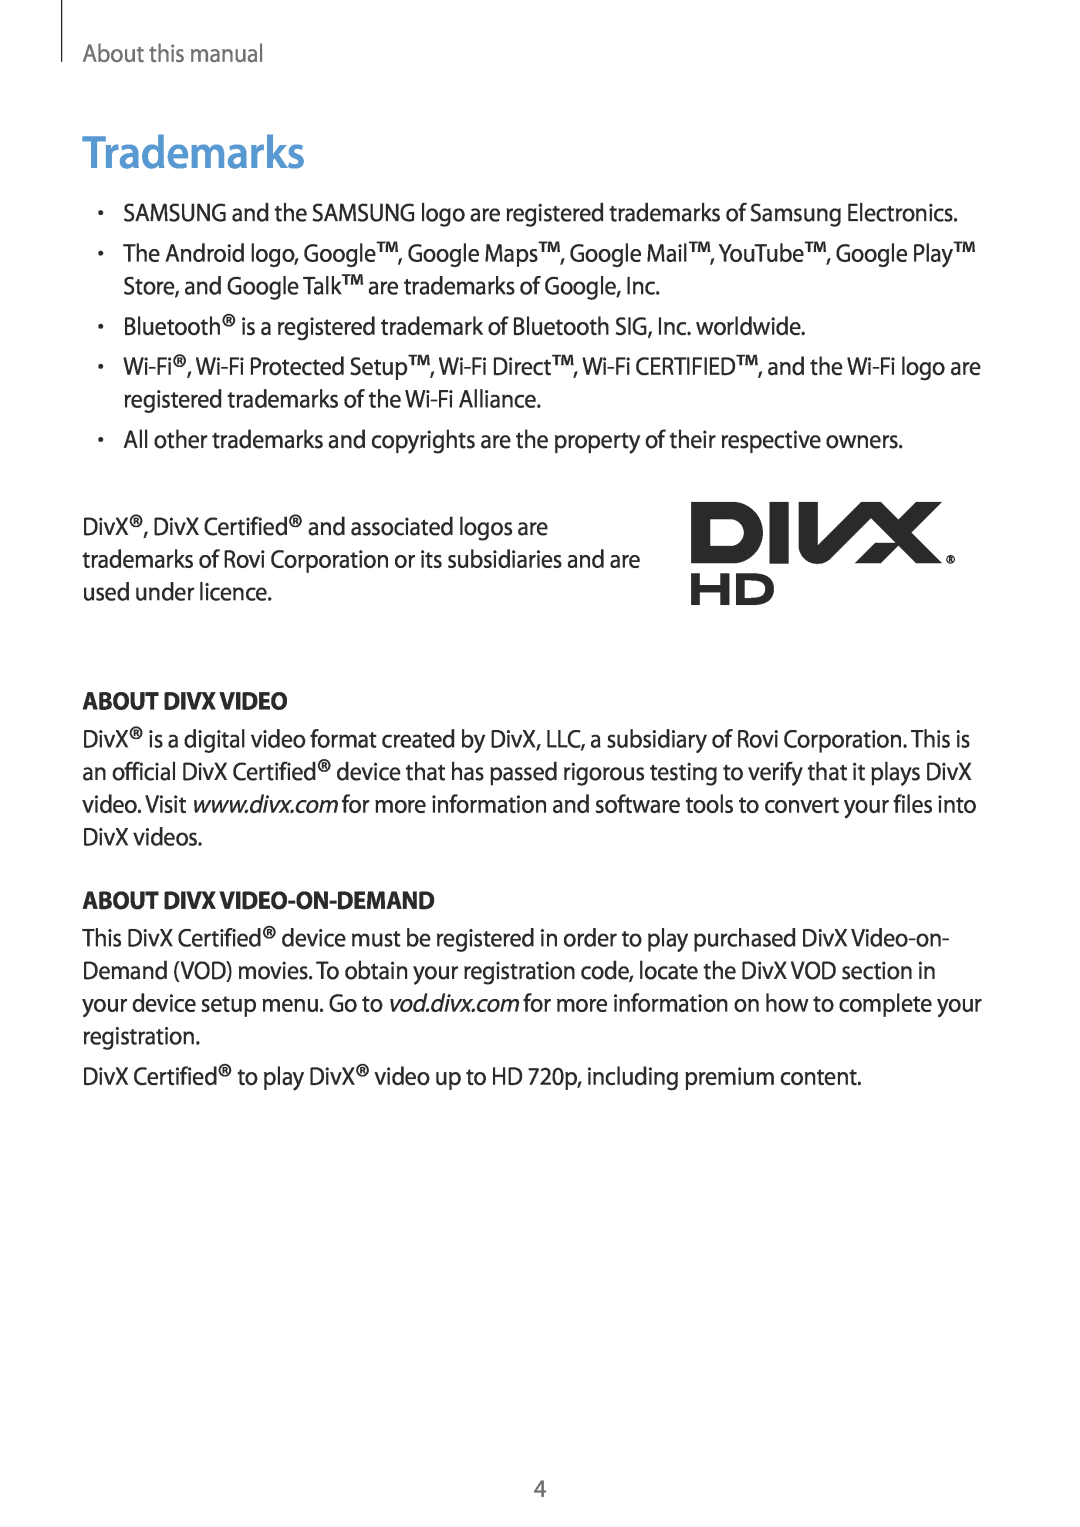 Samsung GT-N5100 user manual Trademarks, About Divx Video-On-Demand, About this manual 